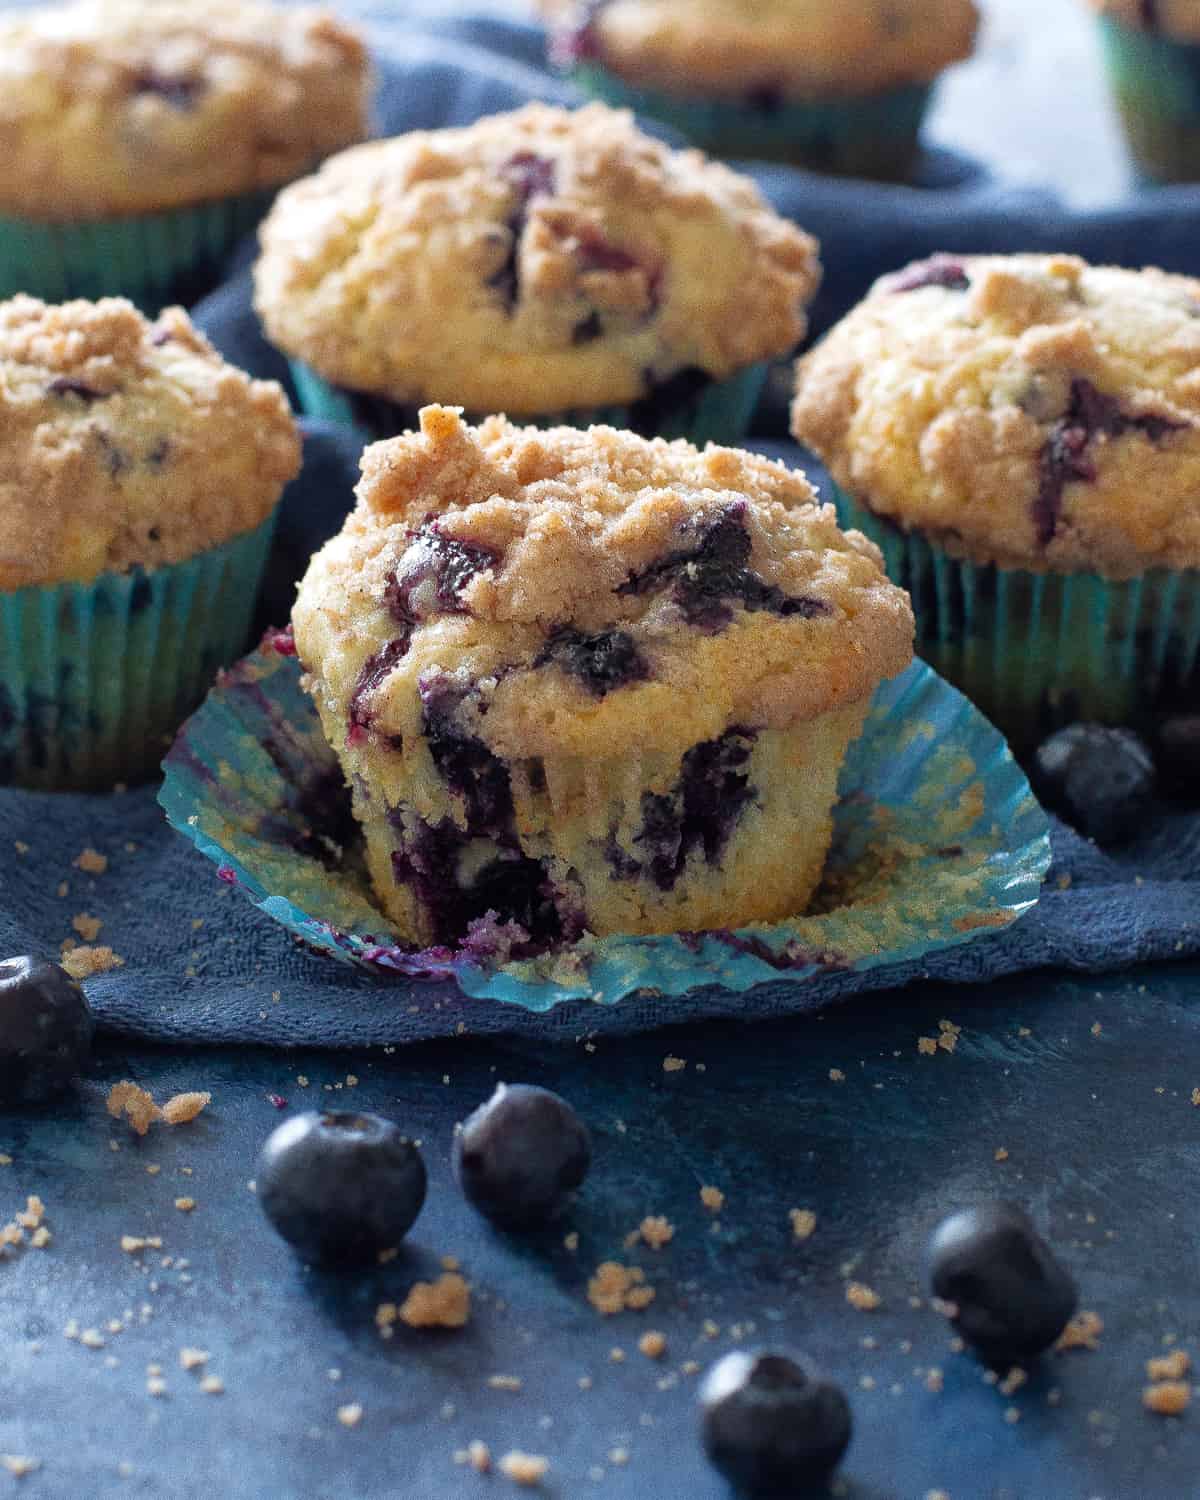 Blueberry Streusel Muffins are full of blueberries, moist, and topped with a streusel. #blueberry #muffins #recipe